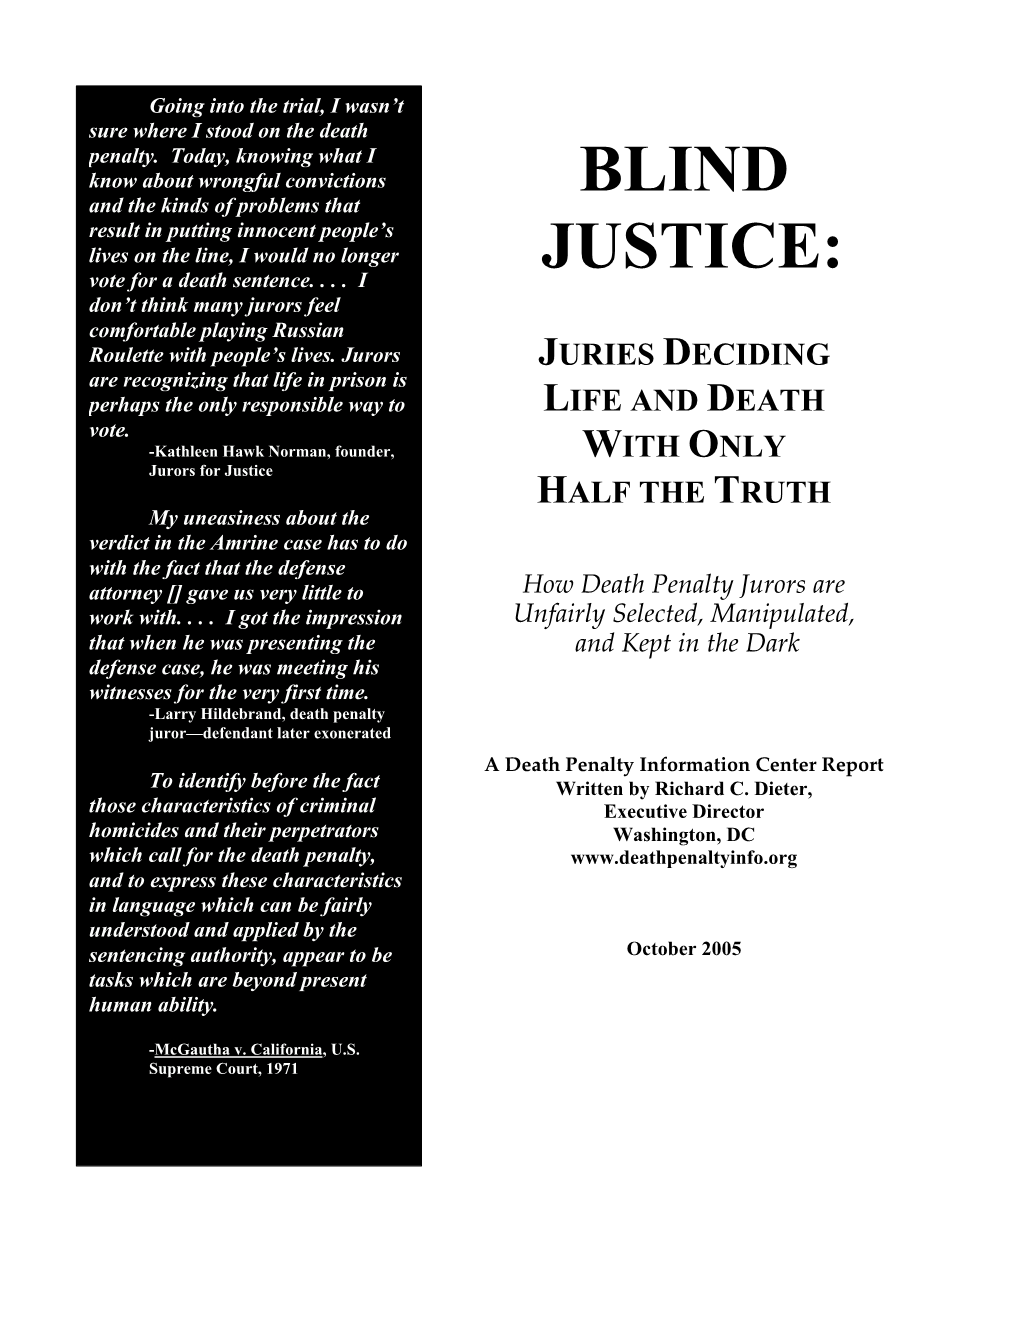 BLIND JUSTICE: JURIES DECIDING LIFE and DEATH with ONLY HALF the TRUTH Table of Contents